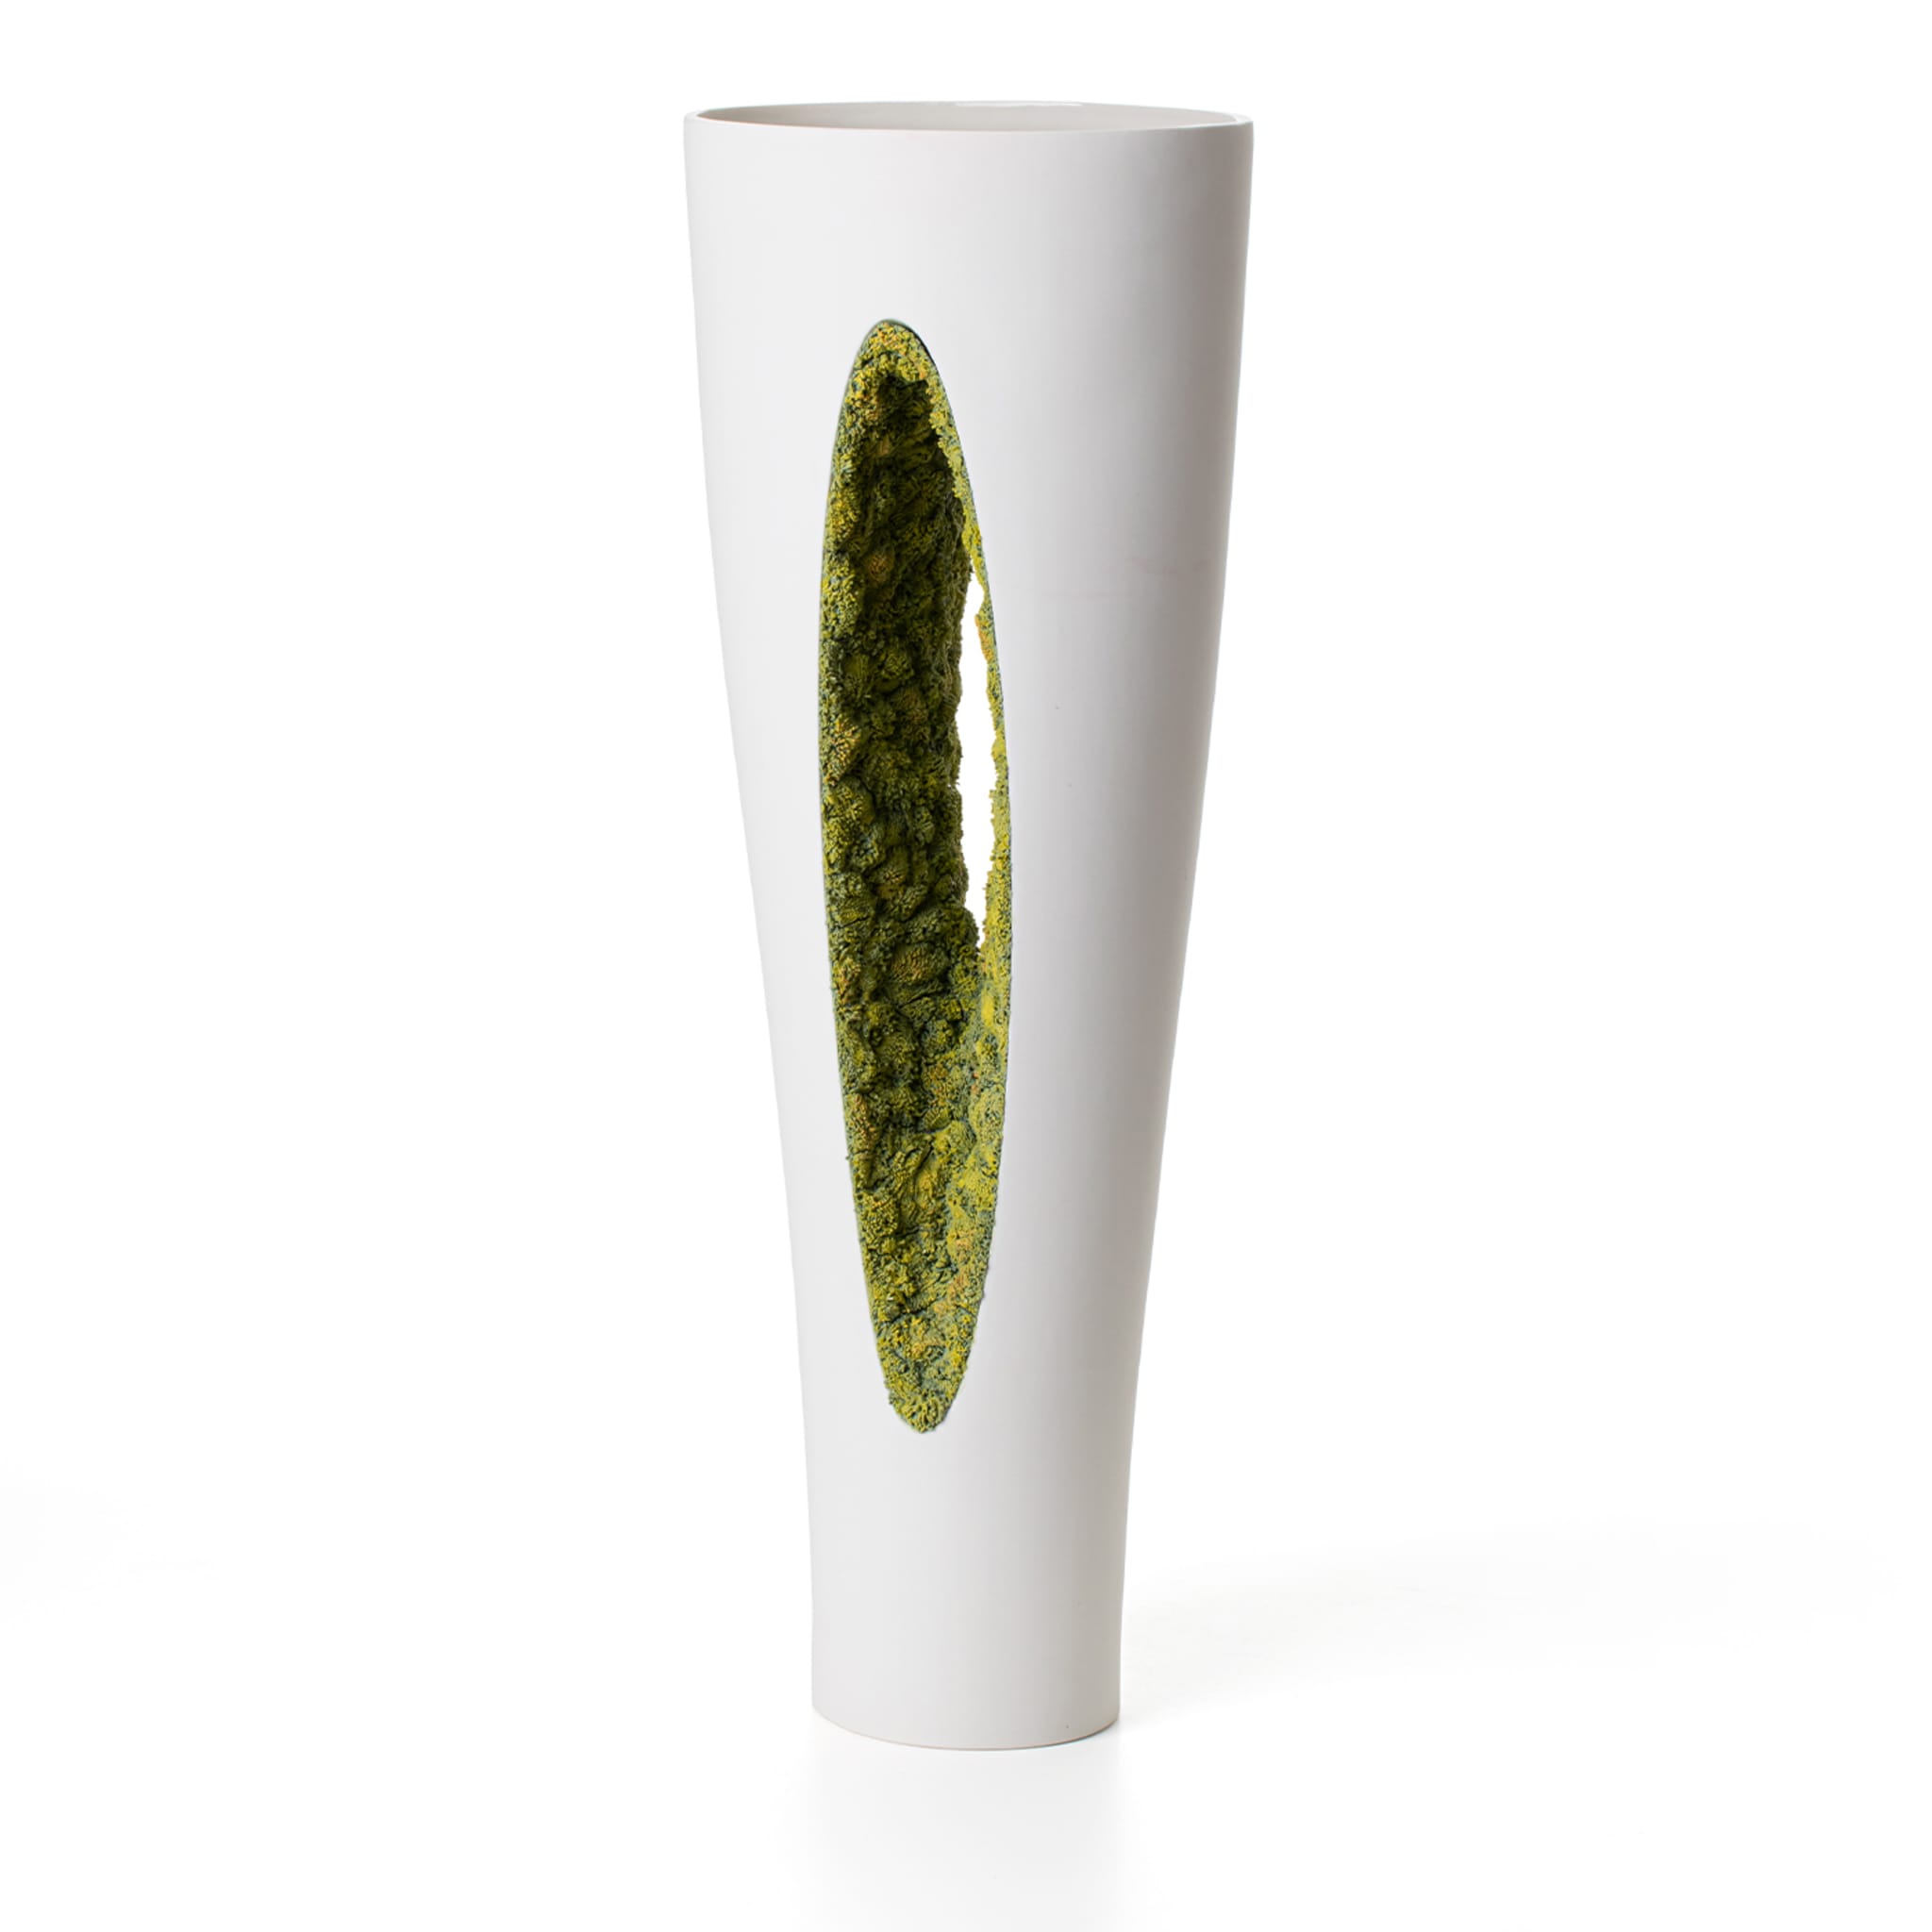 Inside-out Green Moss Vase - Alternative view 1